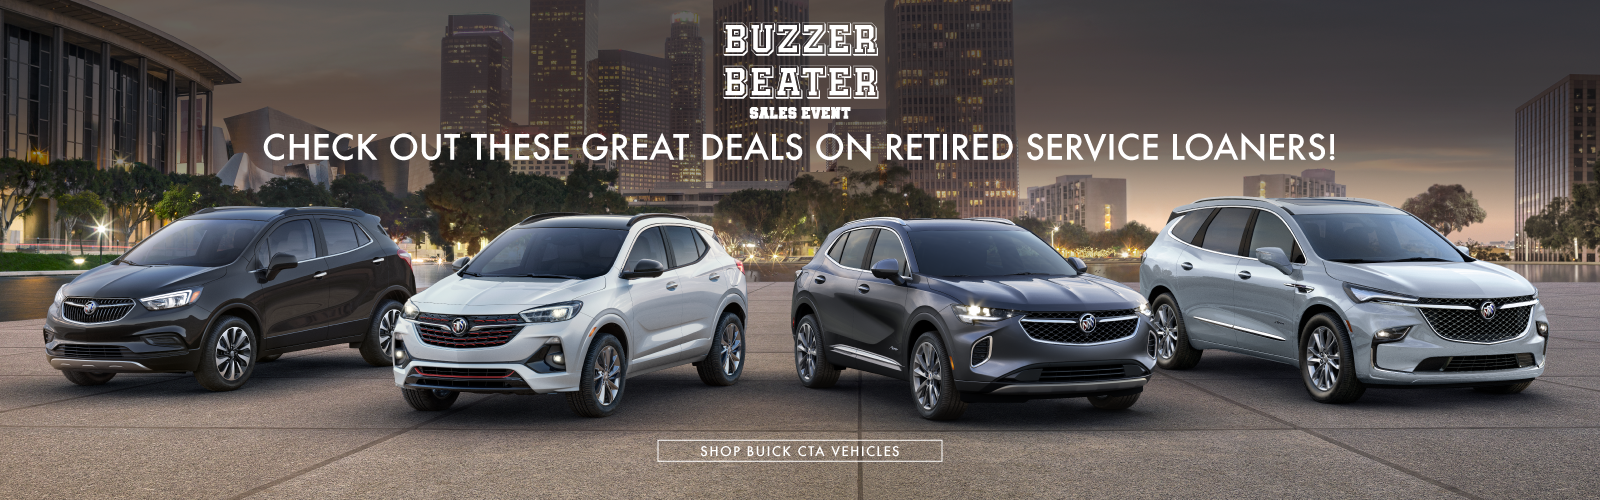 Check out these great deals on retired service loaners!